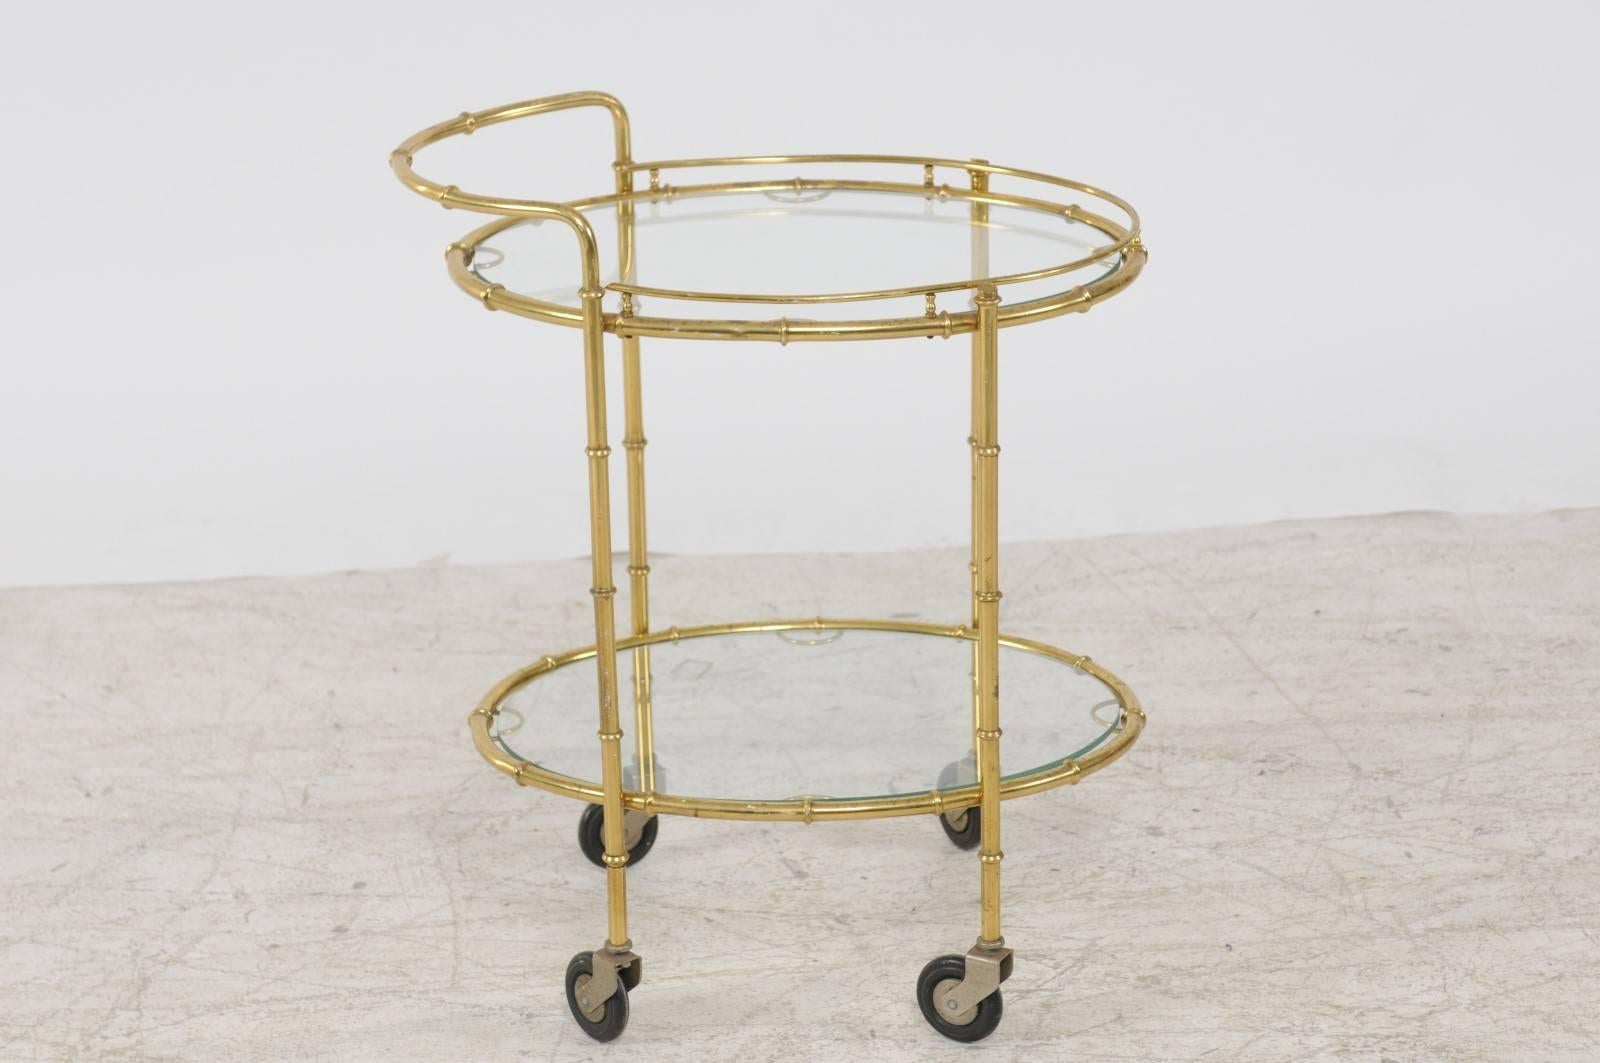 20th Century French Midcentury Brass Two-Tiered Oval Cart with Glass Shelves and Casters For Sale